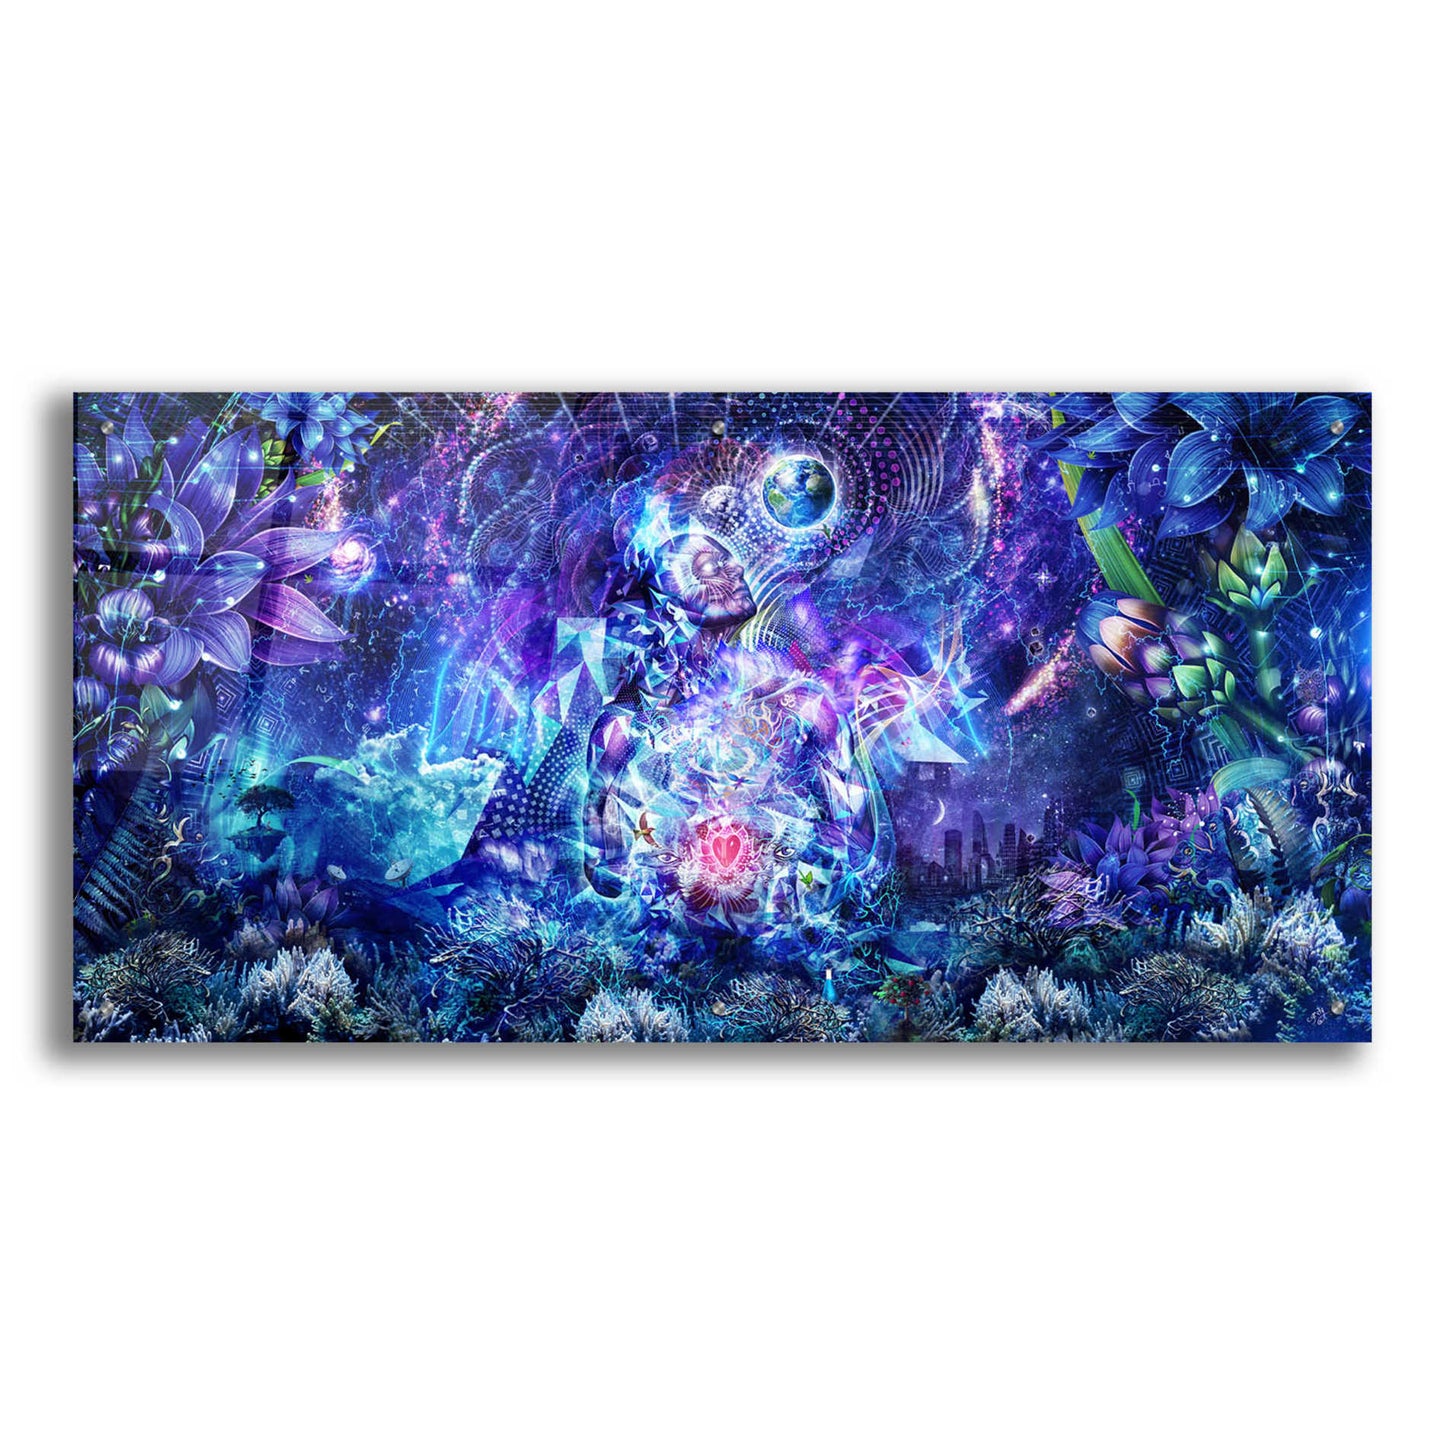 Epic Art 'Transcension' by Cameron Gray, Acrylic Glass Wall Art,48x24